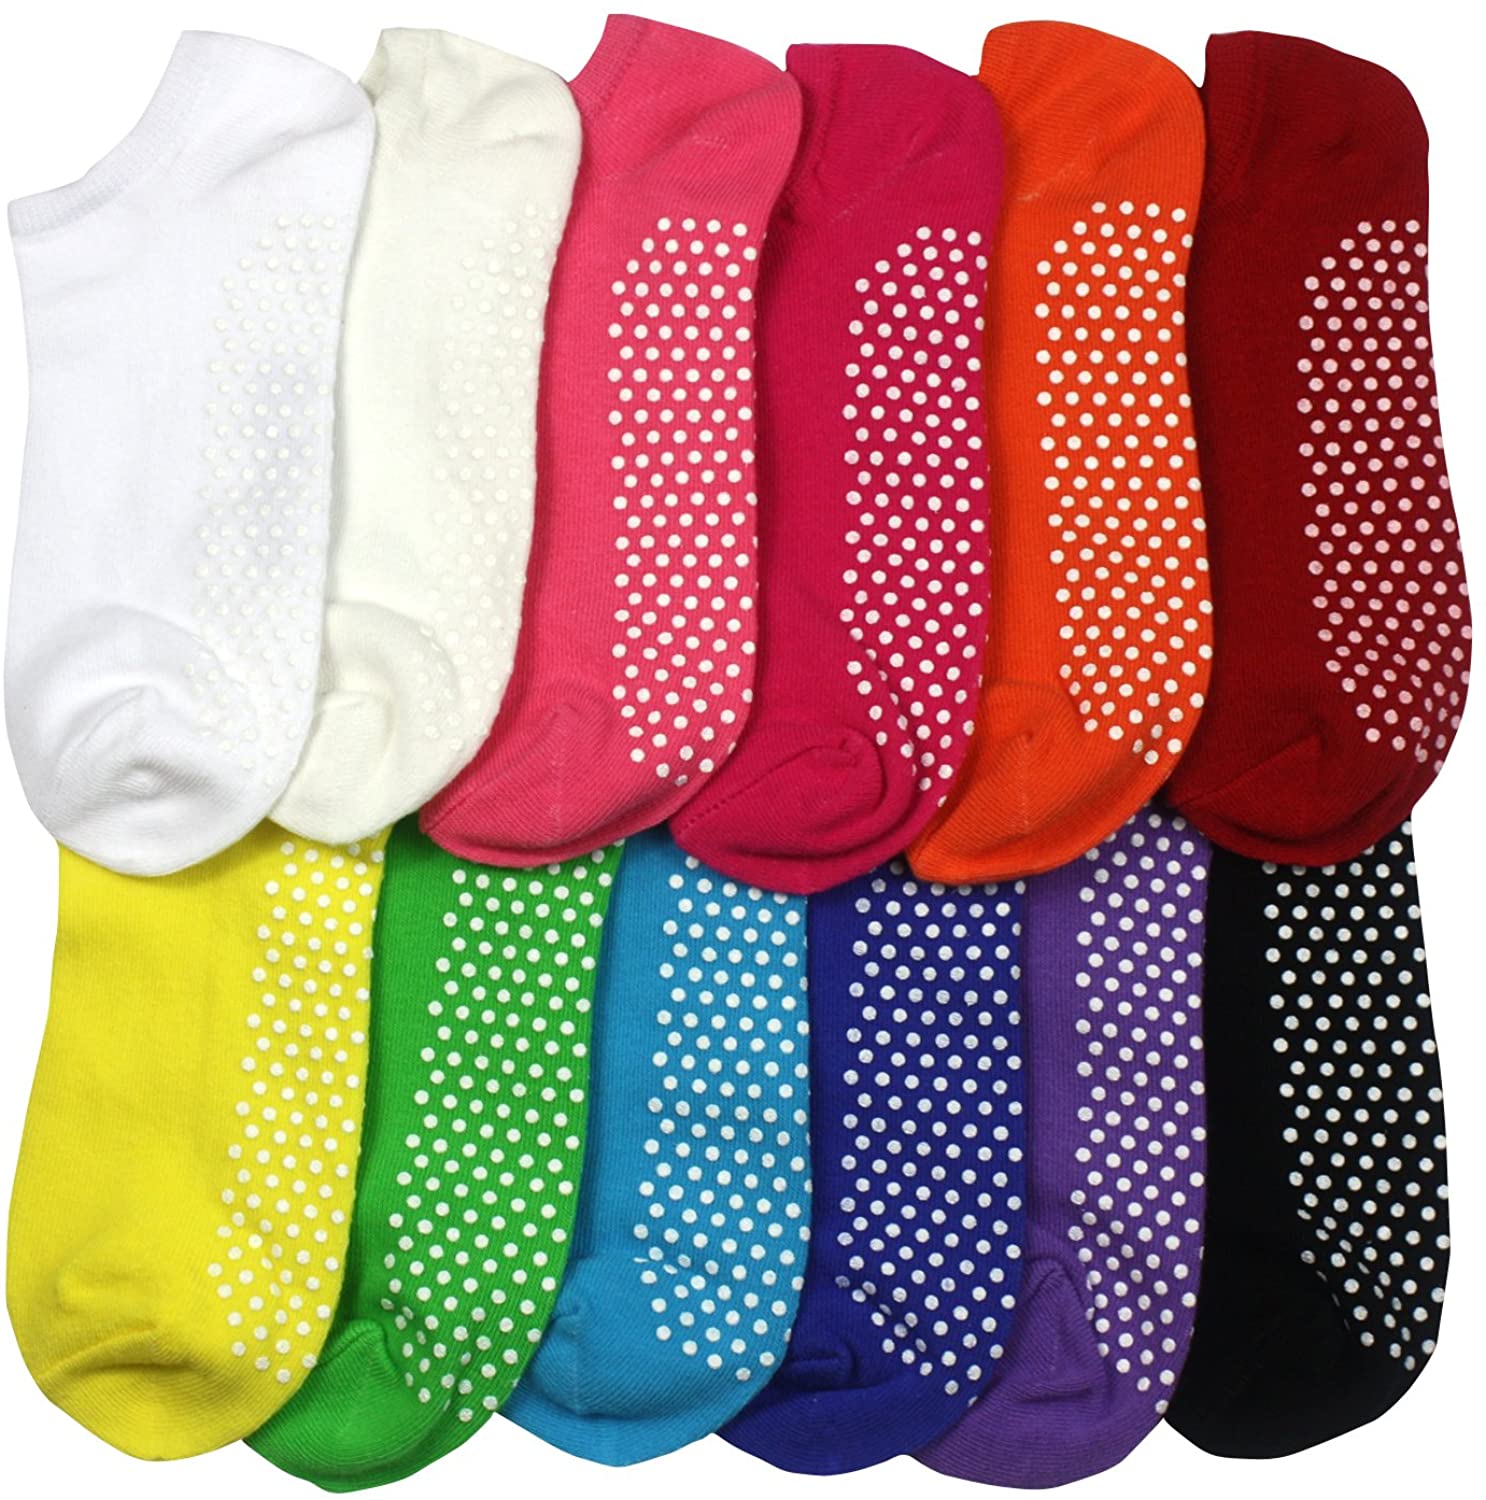 Trampoline Rymora Non Slip Grip Socks for Women and Men Barre & Home Yoga - Perfect for Hospital 2 Pairs 